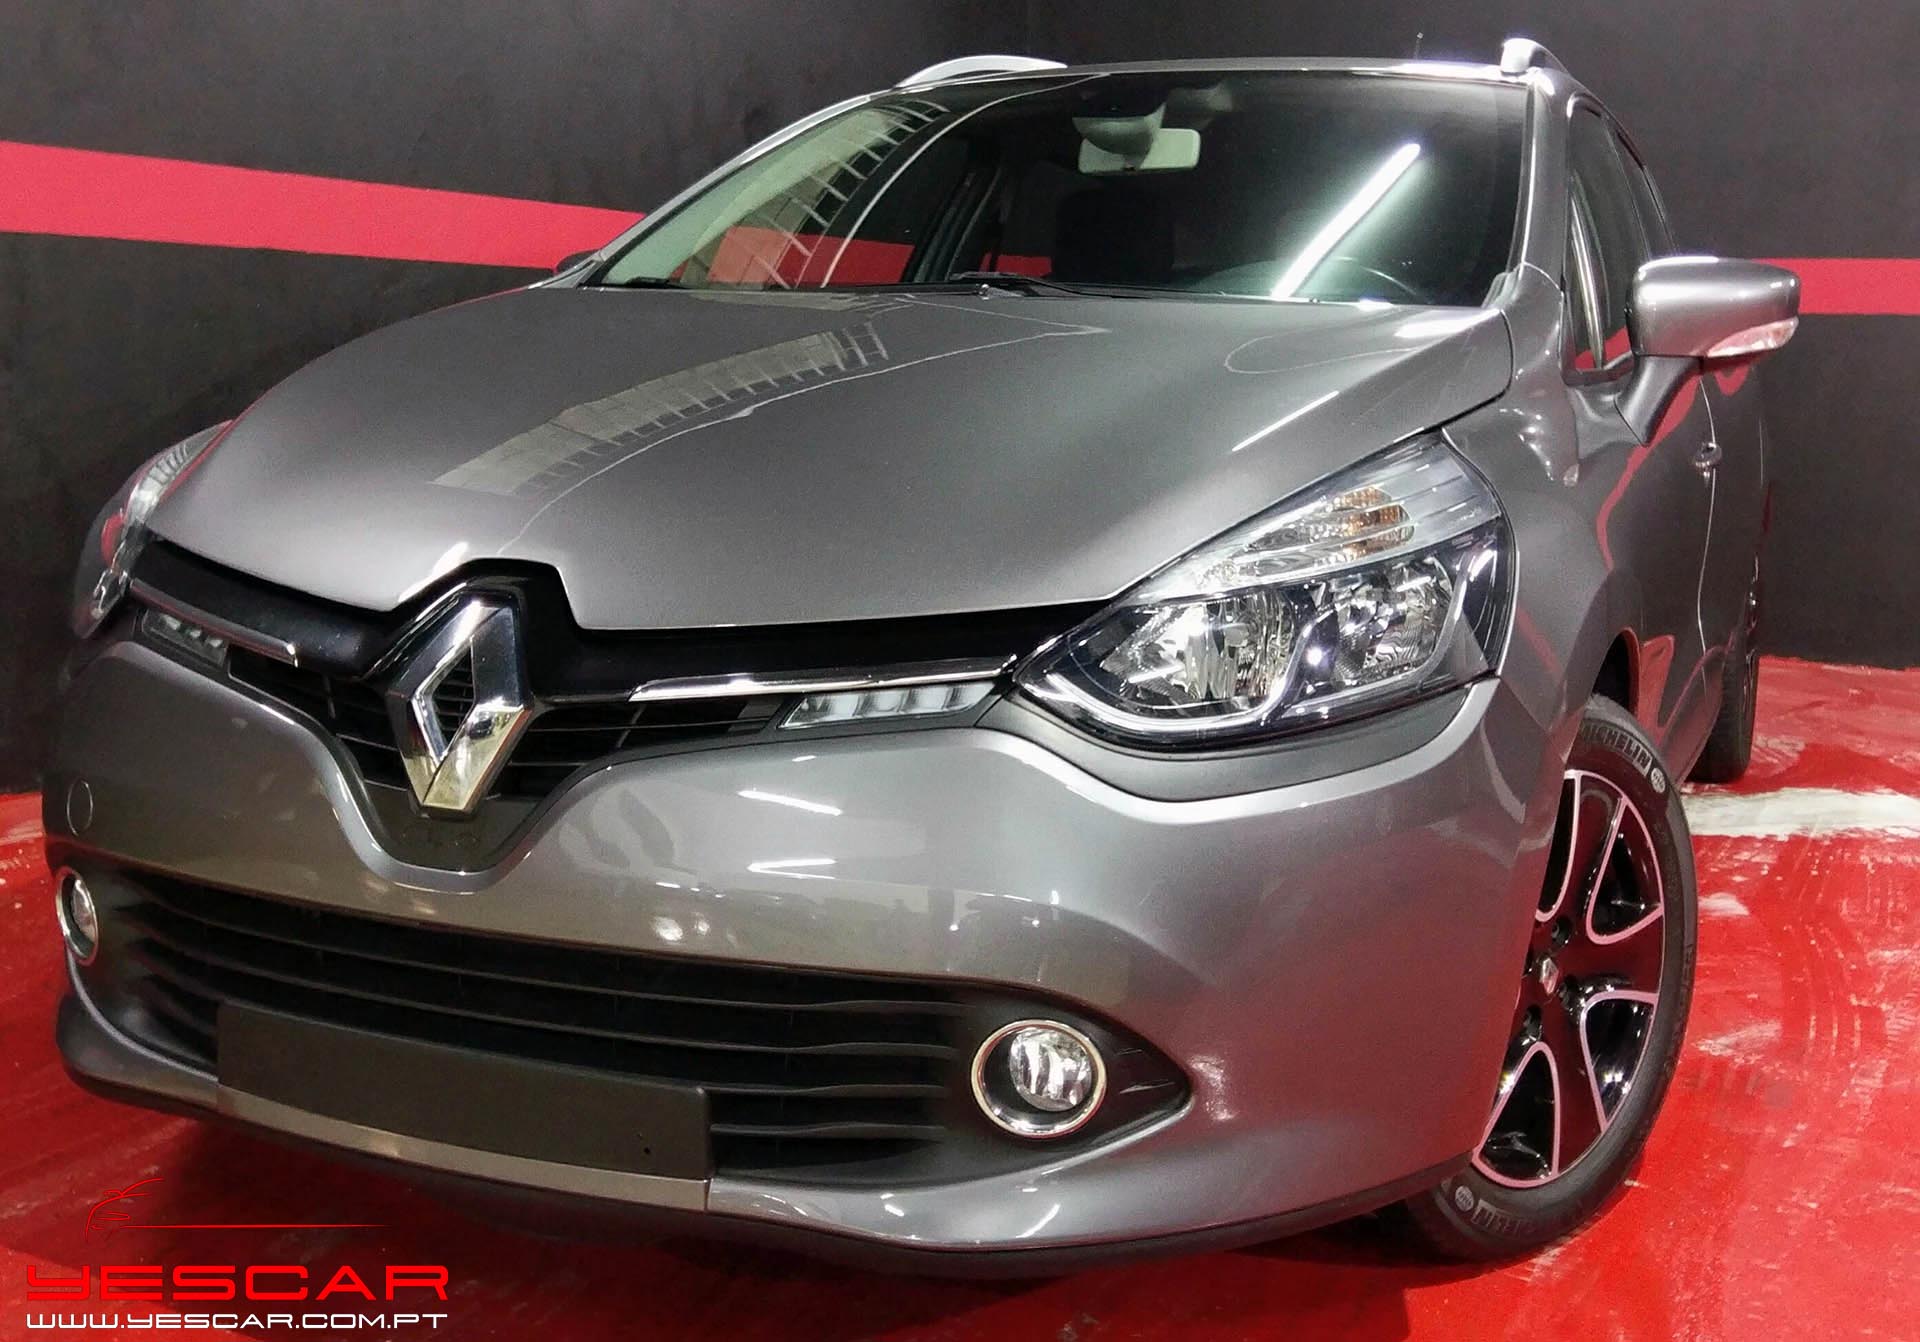 YESCAR_Renault_Clio_SW (10)